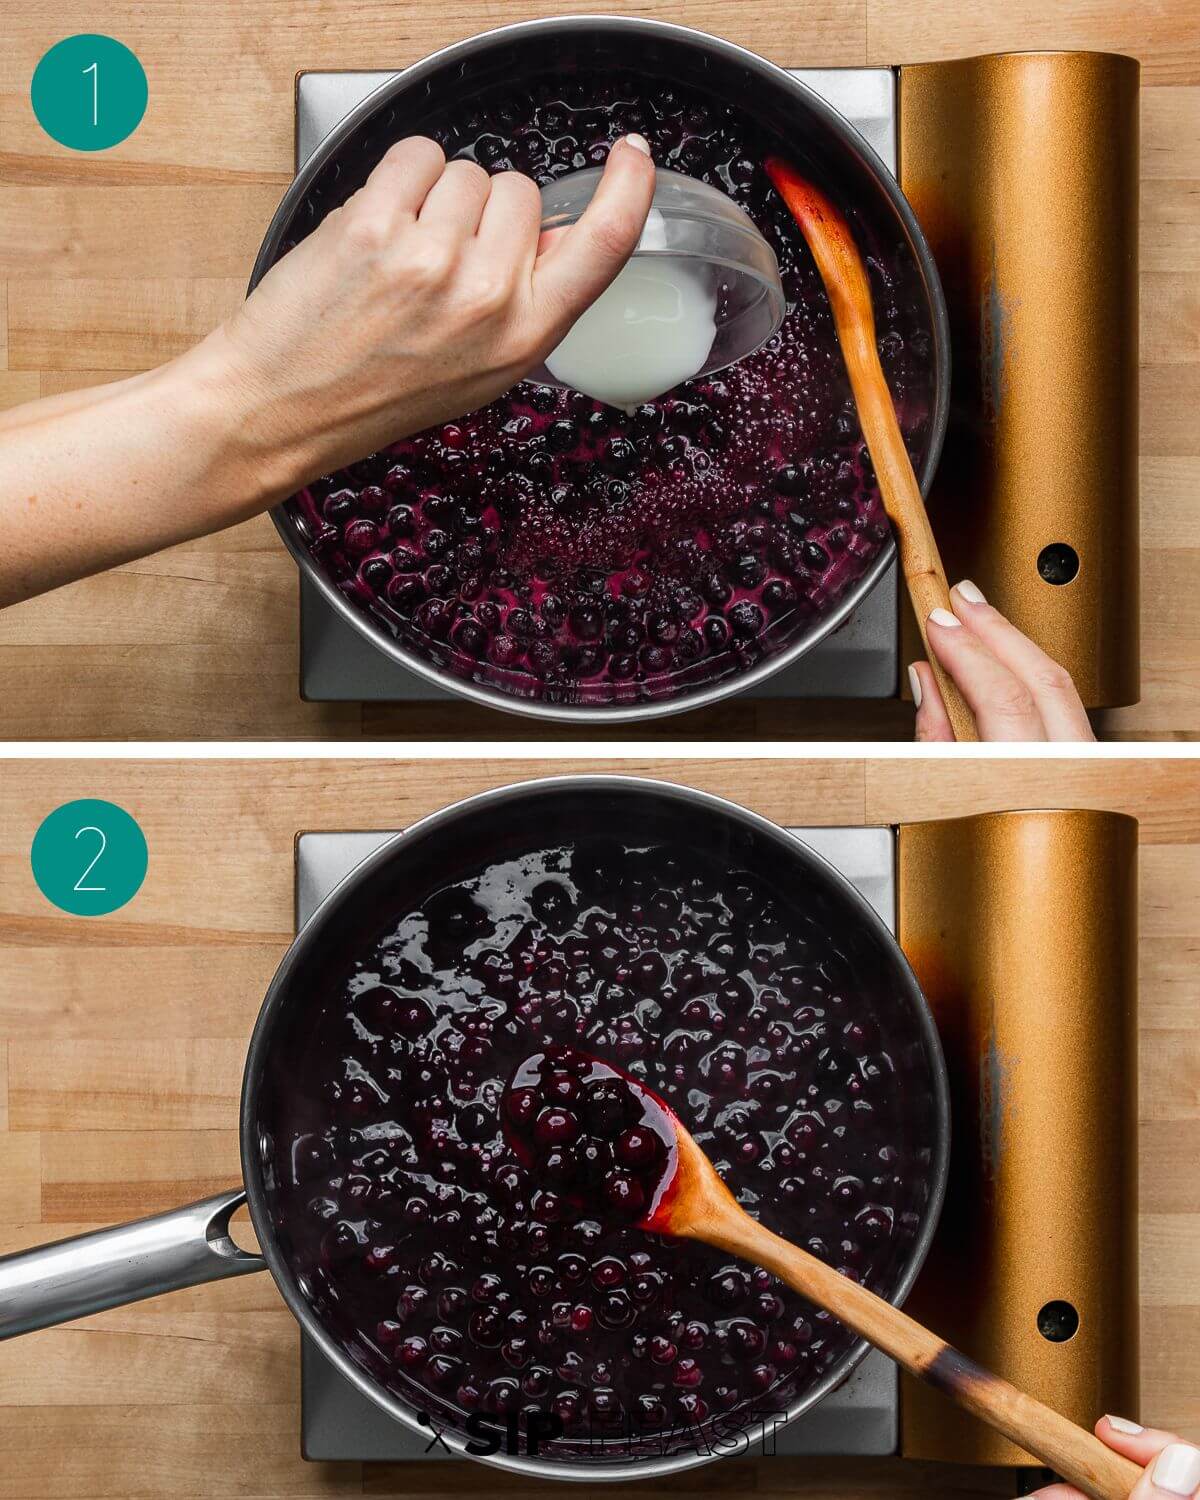 Blueberry sauce process collage.